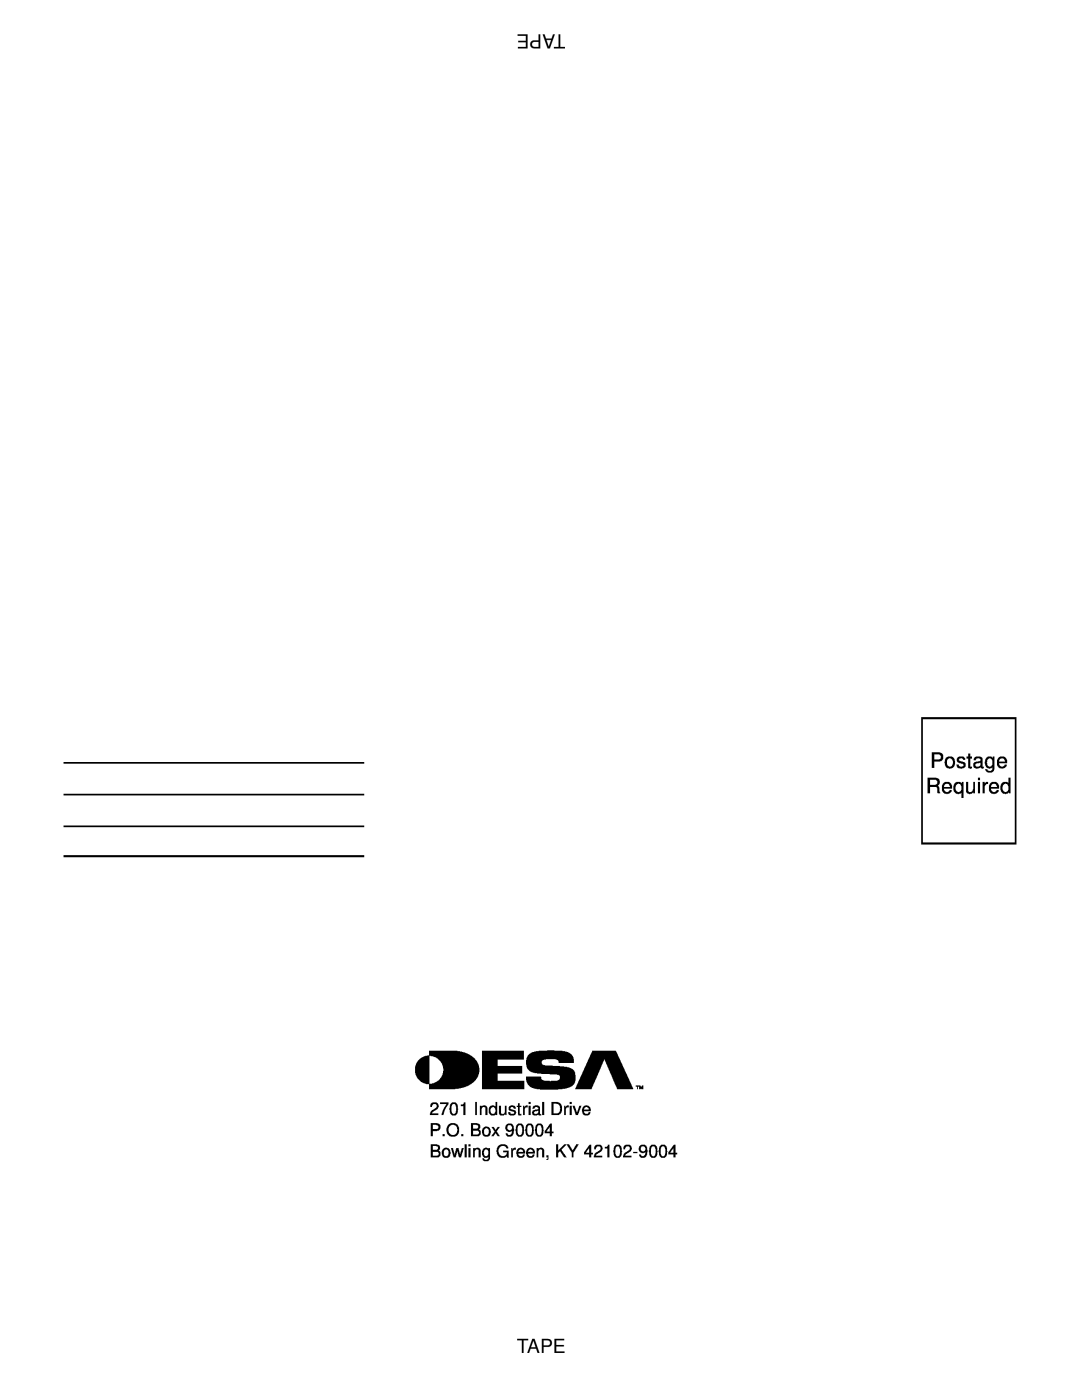 Desa VP325E(B) installation manual Postage Required, Tape, Industrial Drive P.O. Box Bowling Green, KY 